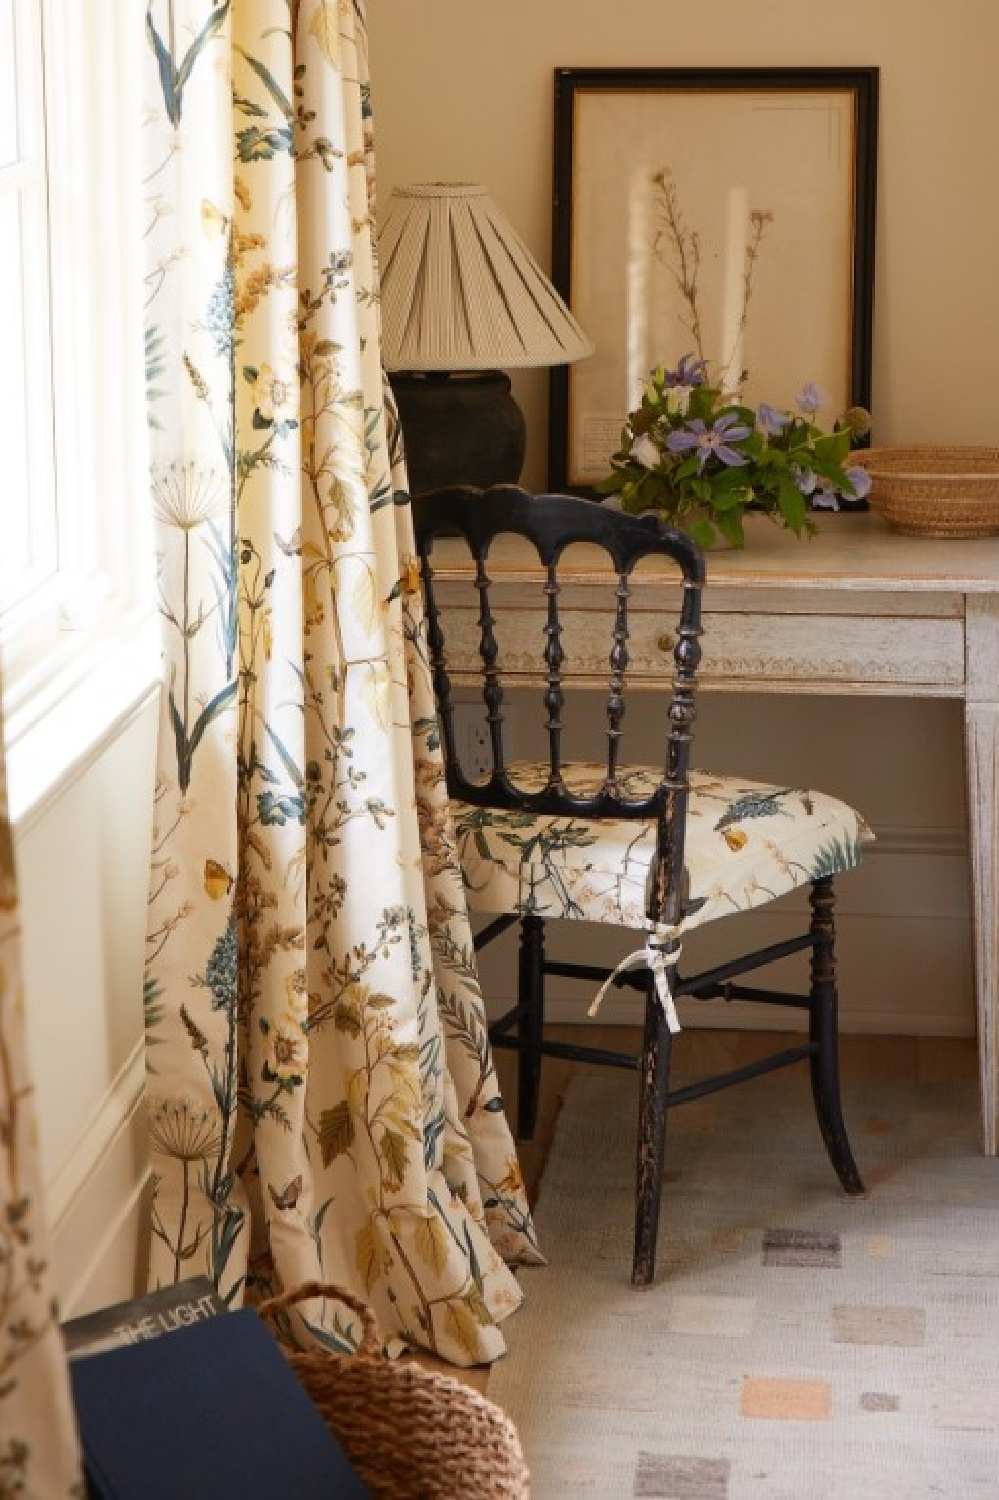 Lovely print on curtains and chair cushion. Timeless interior design by Shannon Bowers with nods to European antiques, patina, understated elegance, and sophisticated simplicity. #shannonbowers #timelessinteriors